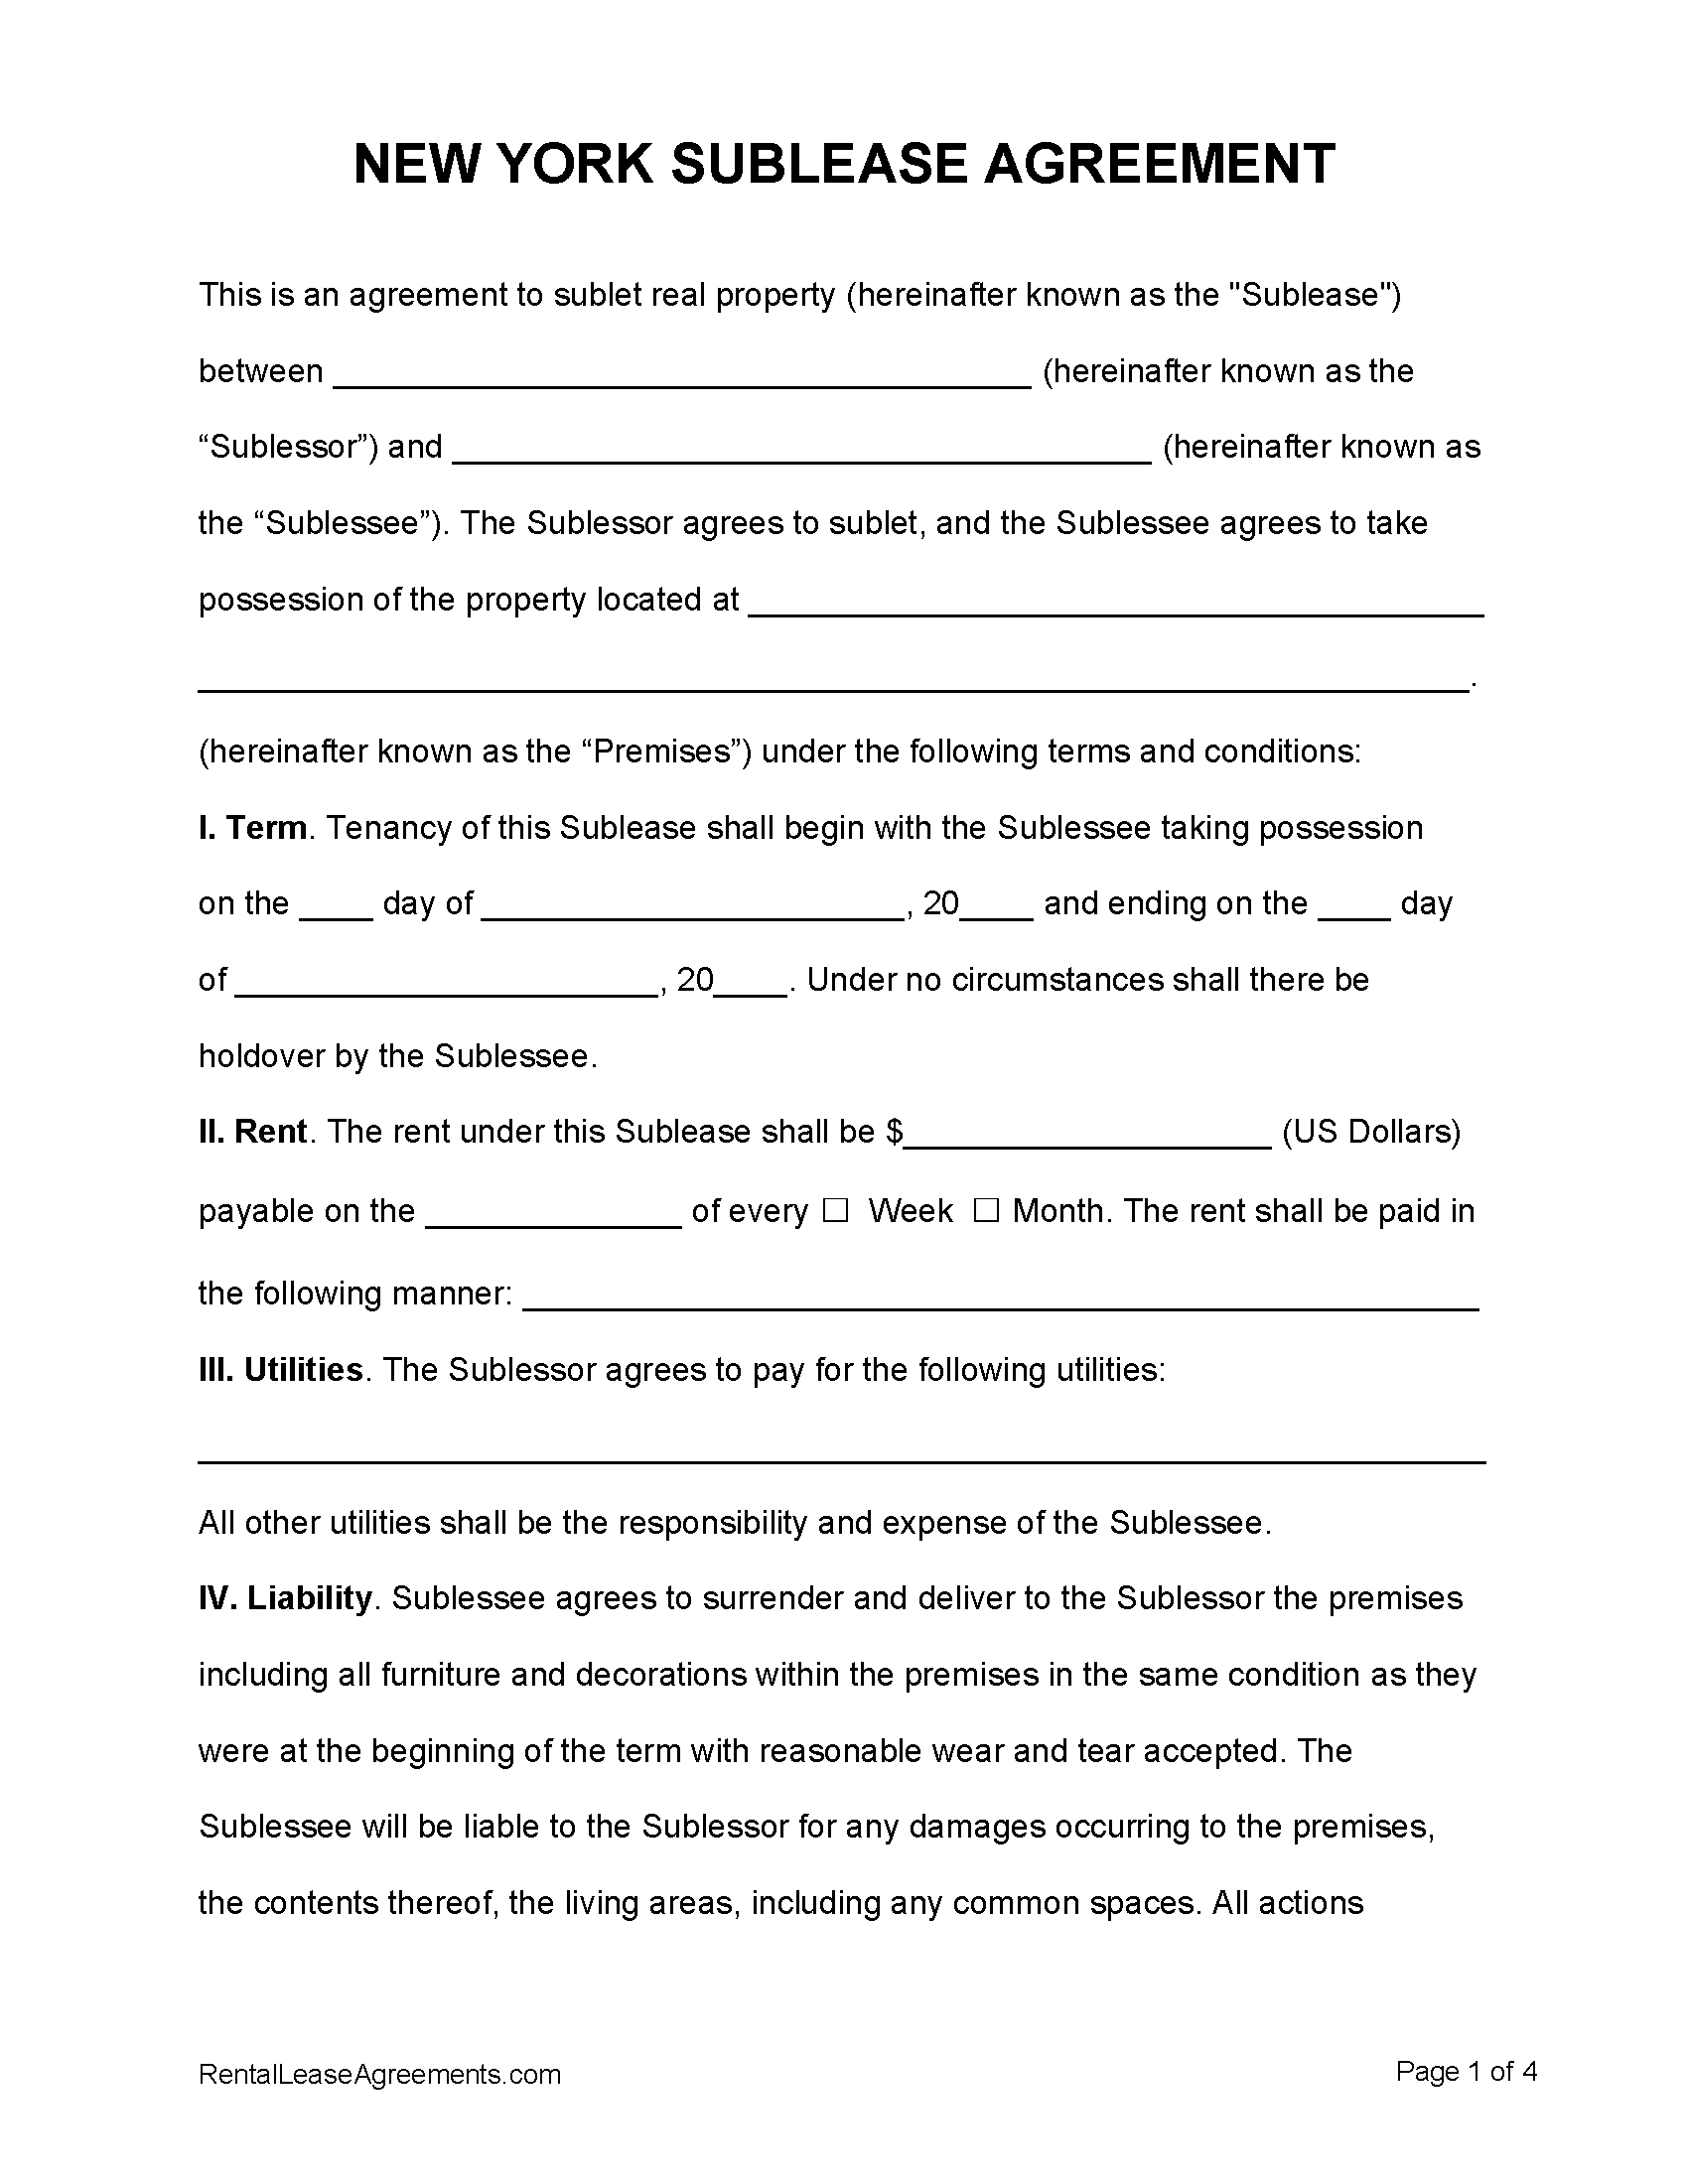 Free New York Sublease Agreement  PDF - MS Word In free commercial sublease agreement template